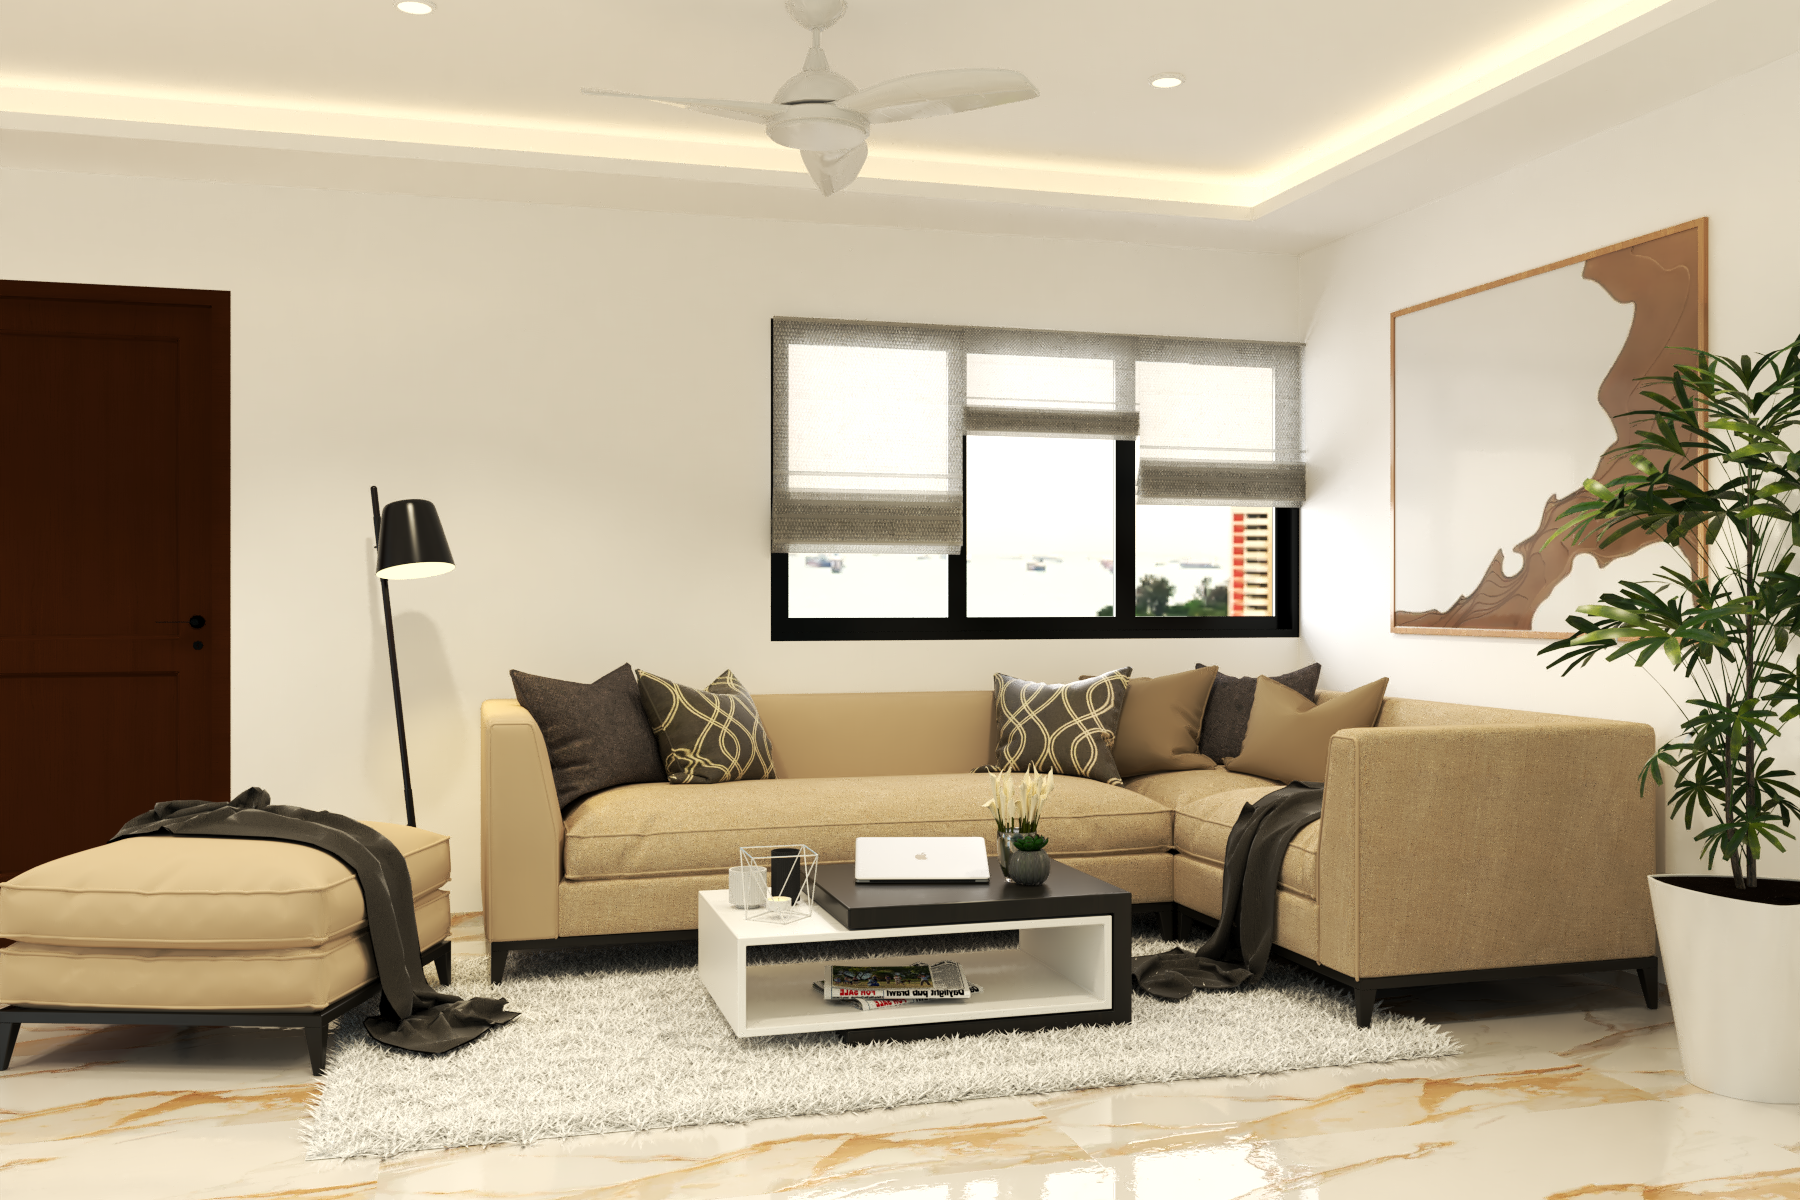 Spacious Modern Style Convenient Living Room Design With L-Shaped Sofa